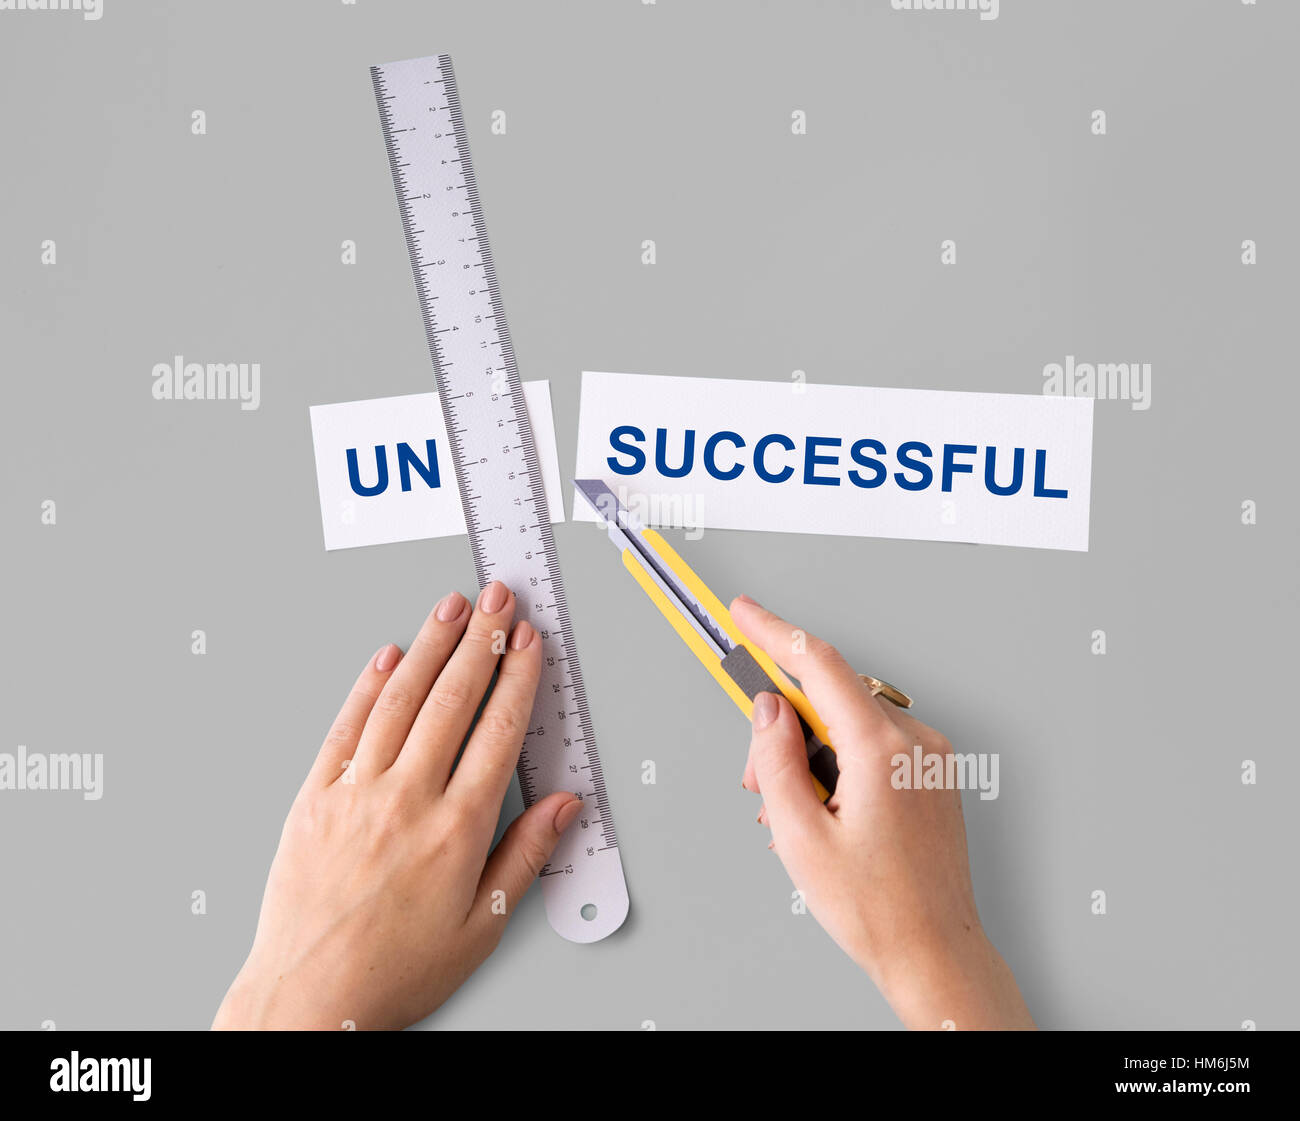 Unsuccessful Incomplete Unfinished Hands Cut Word Split Concept Stock Photo